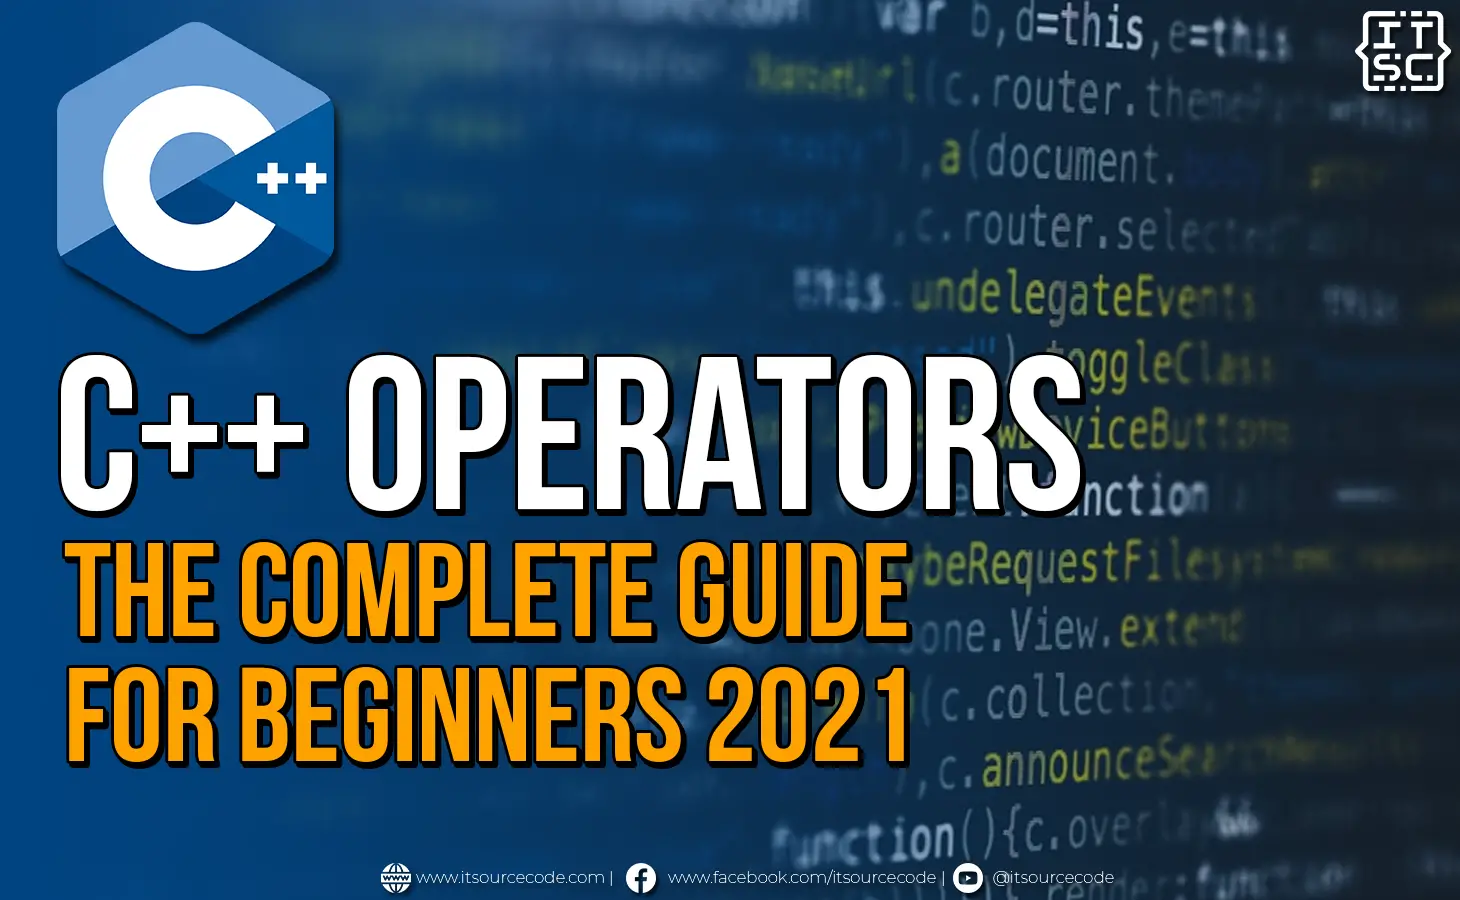 C++ Operator The Complete Guide for Beginners 2021